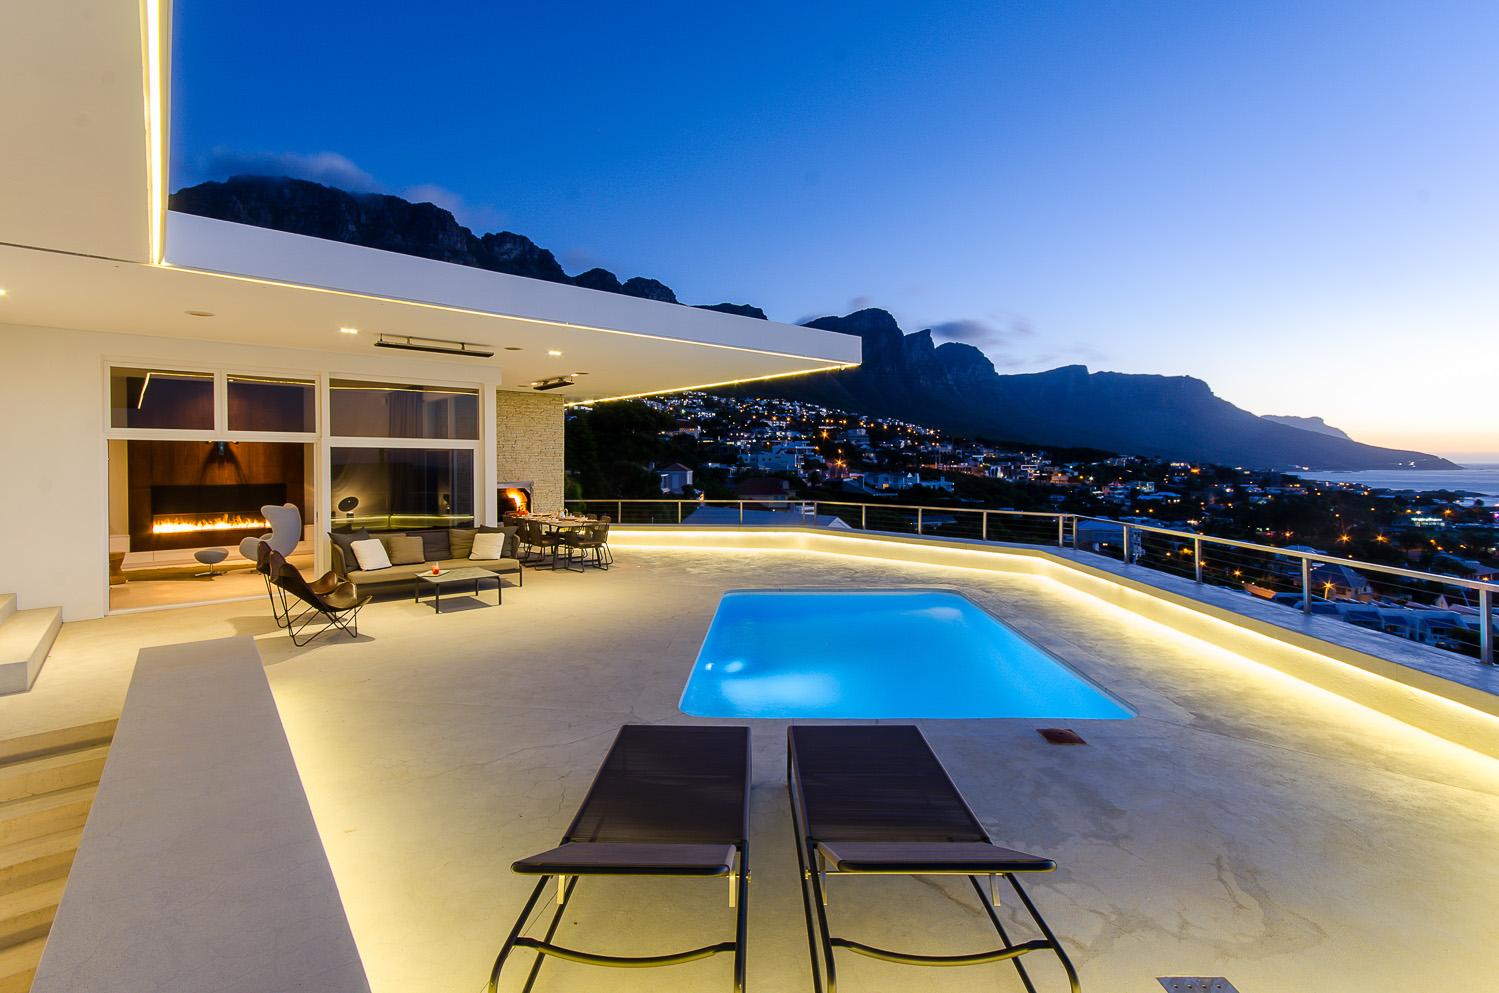 Photo 9 of Strathmore Dream accommodation in Camps Bay, Cape Town with 4 bedrooms and 3 bathrooms